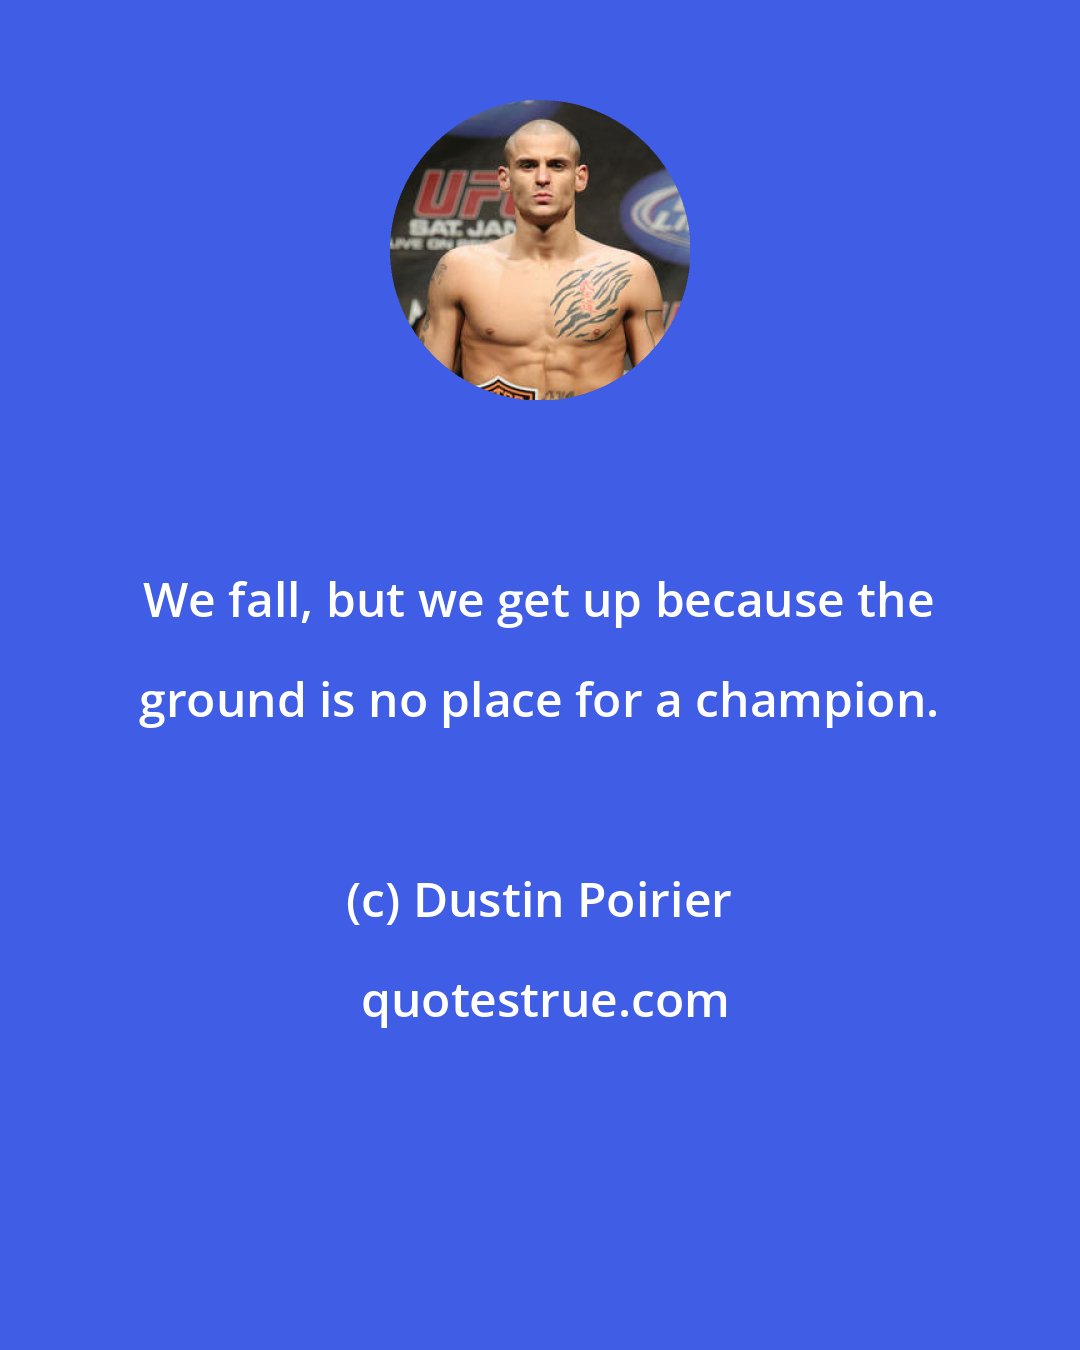 Dustin Poirier: We fall, but we get up because the ground is no place for a champion.